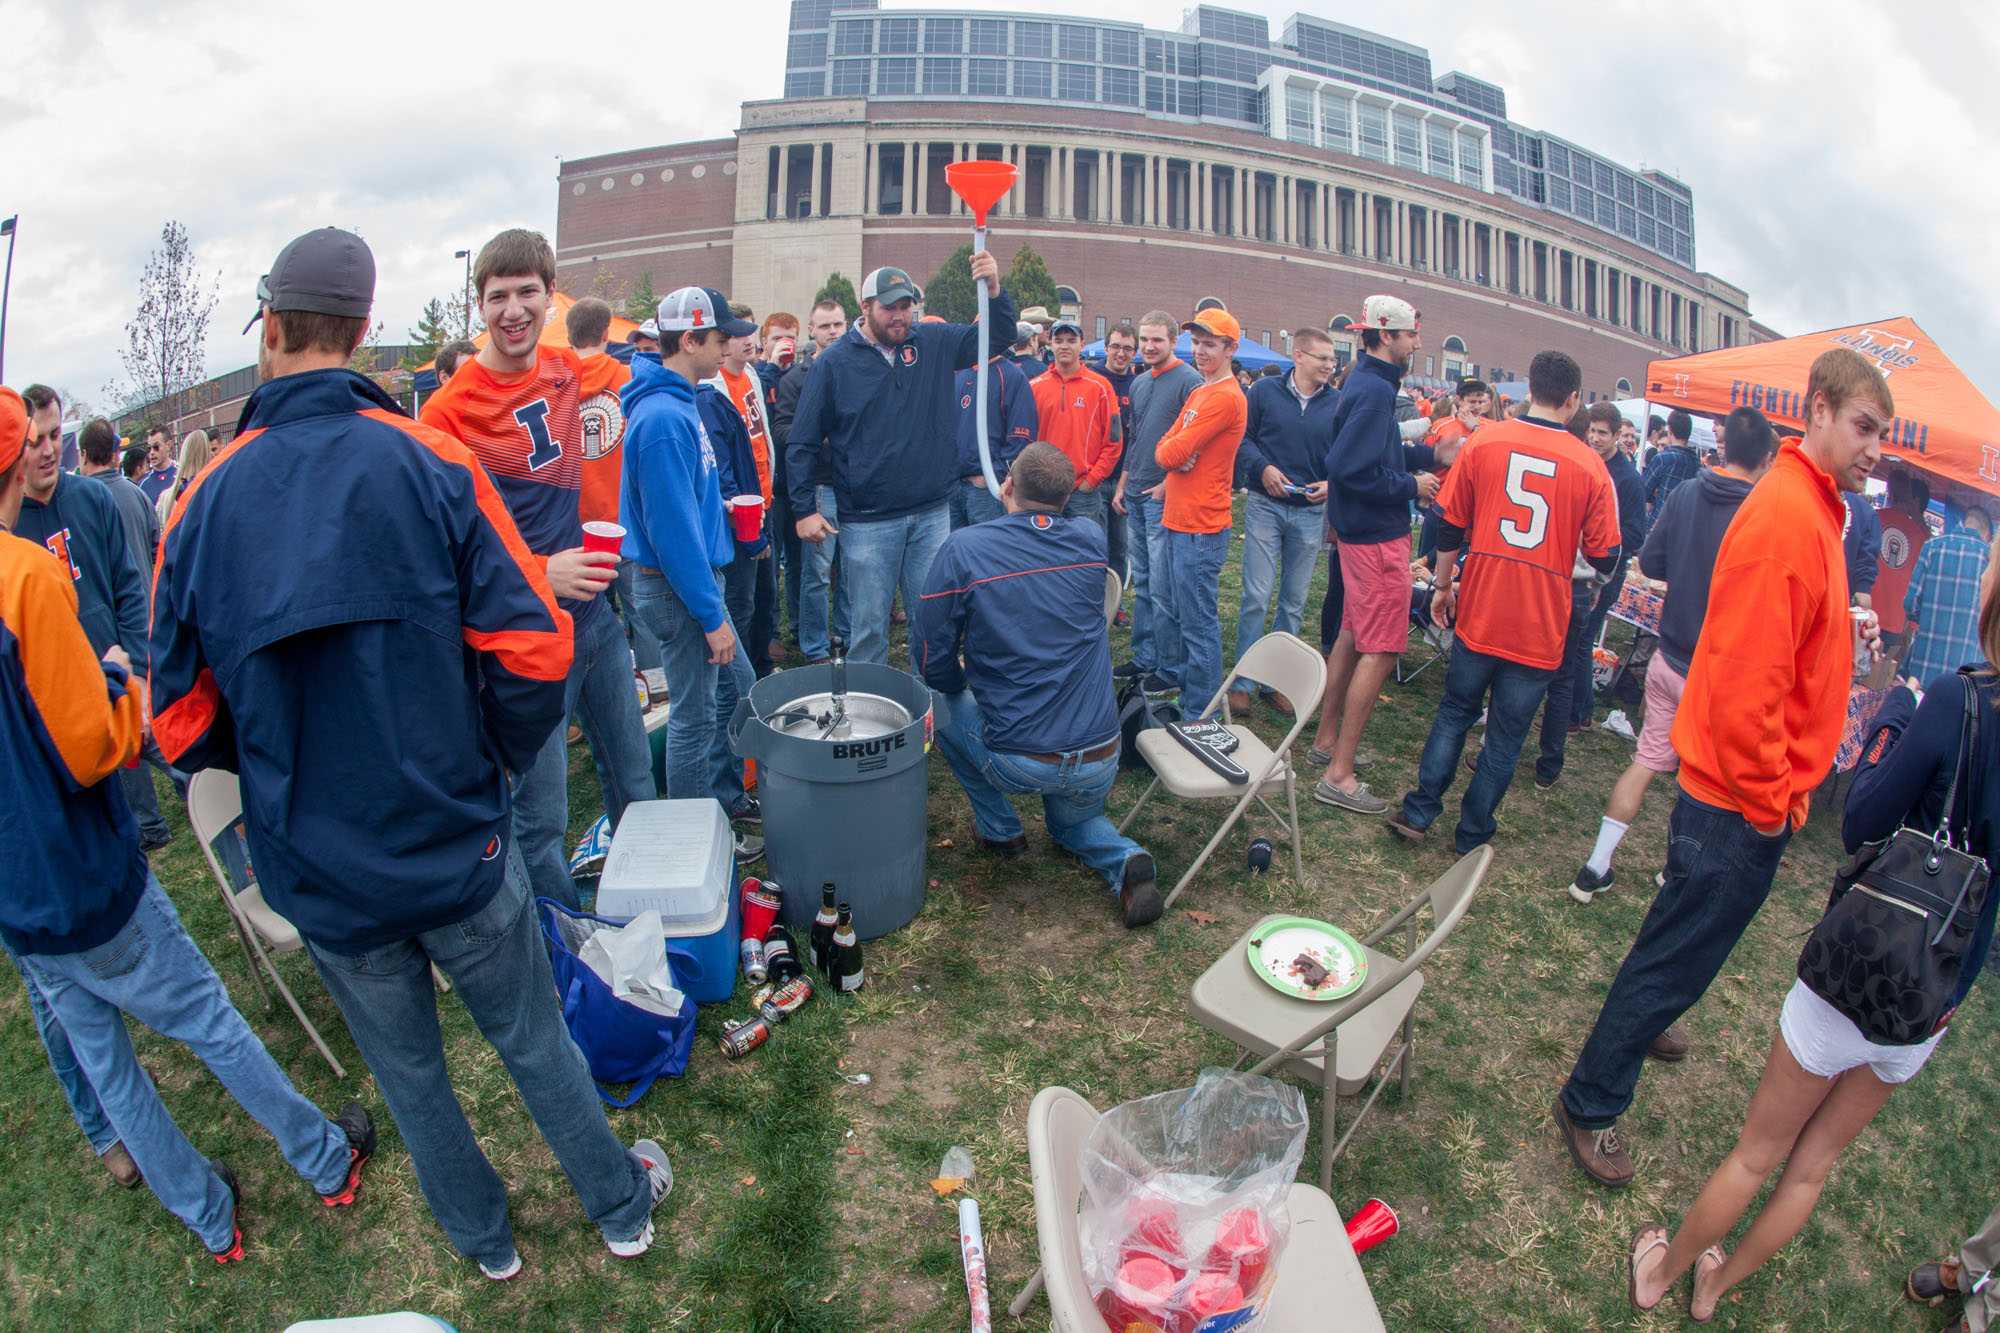 Members+of+the+SAE+fraternity+at+Illinois+hosted+a+student%0A+tailgate+in+Grange+Grove+Saturday+in+an+effort+to+establish+a+new+%0Afootball+game+day+tradition.+